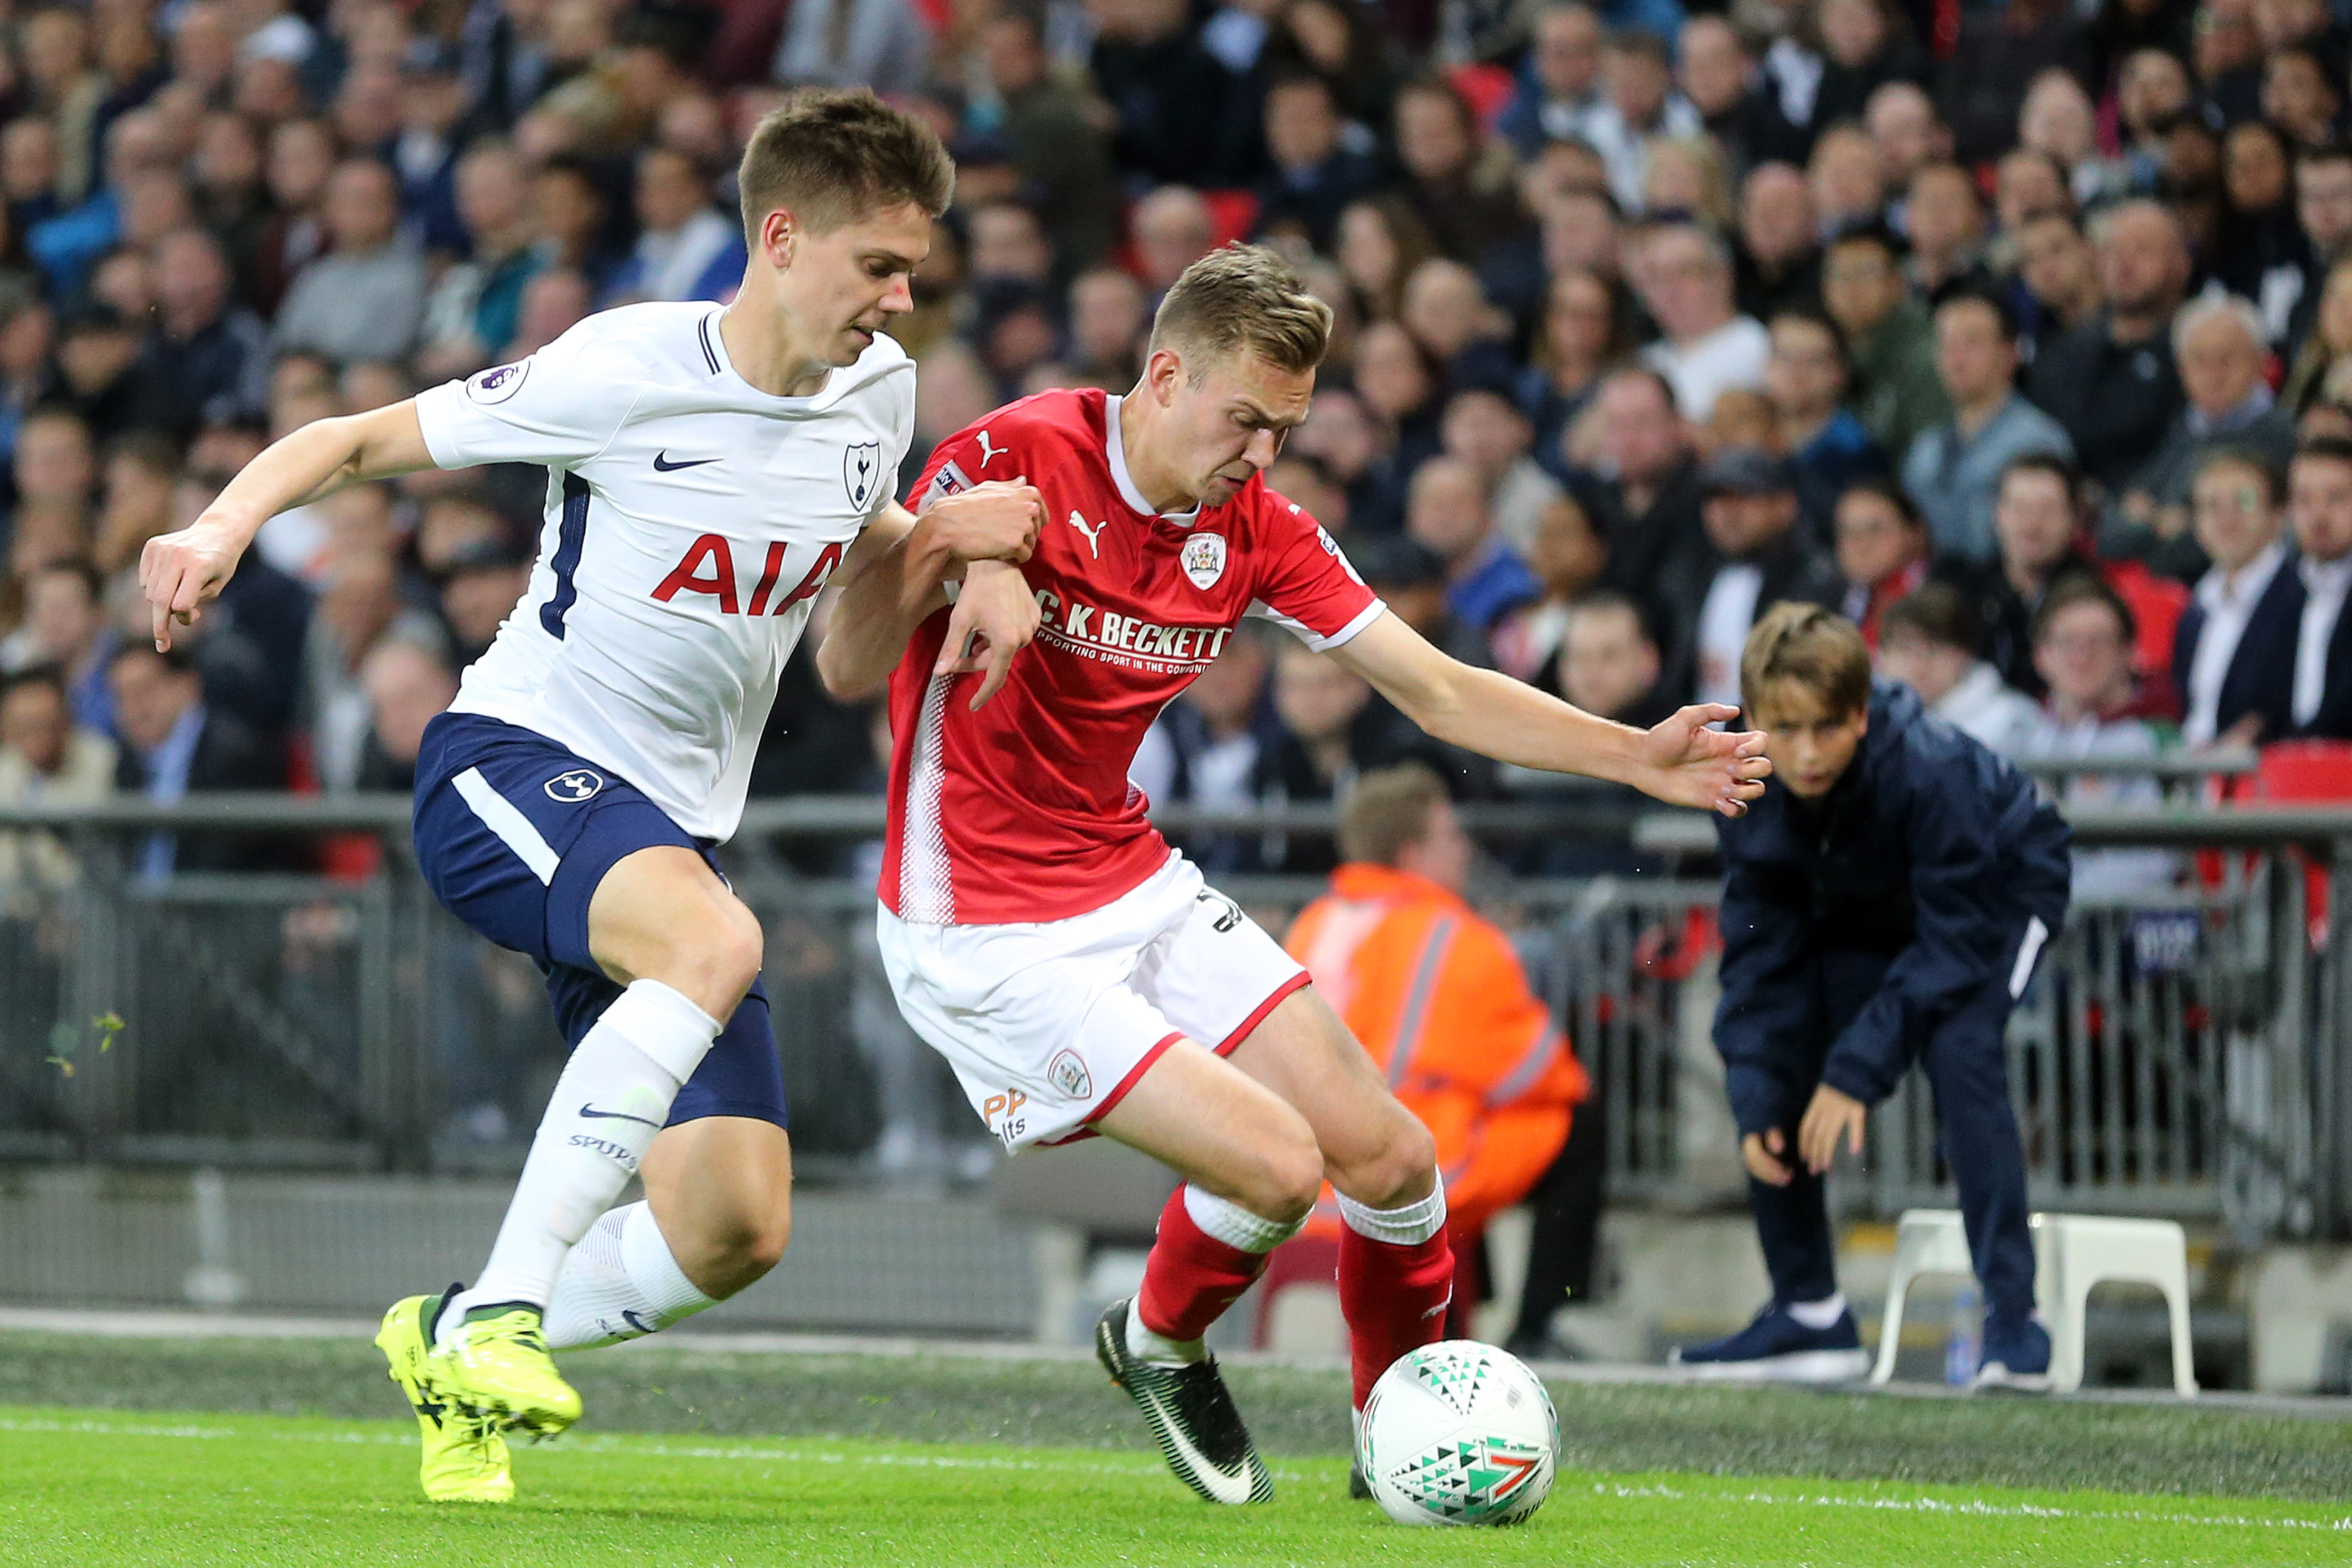 Ryan Hedges of Barnsley and Juan Foyth of Tottenham Hotspur  in action at Wembley.